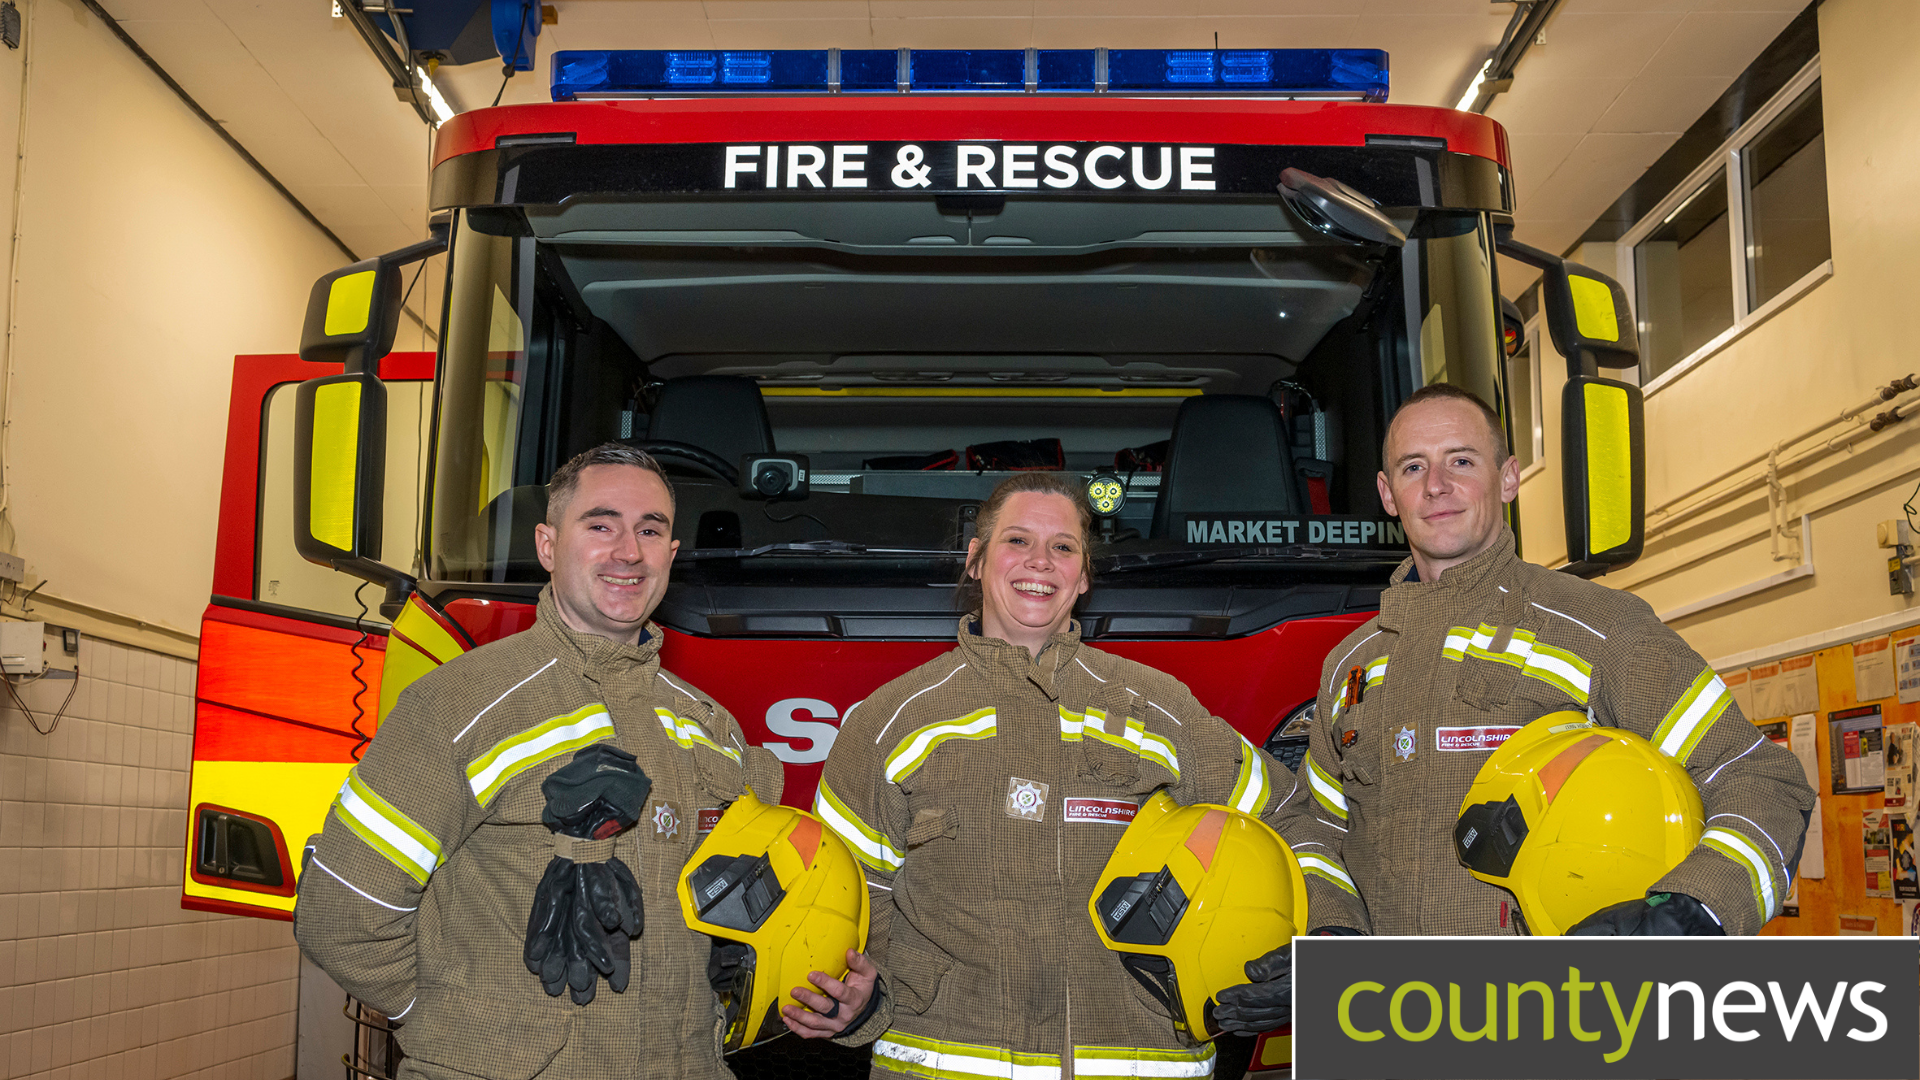 Sean Reidy, Rachael Horner and James Tamburrini are On Call firefighters at Market Deeping fire station.